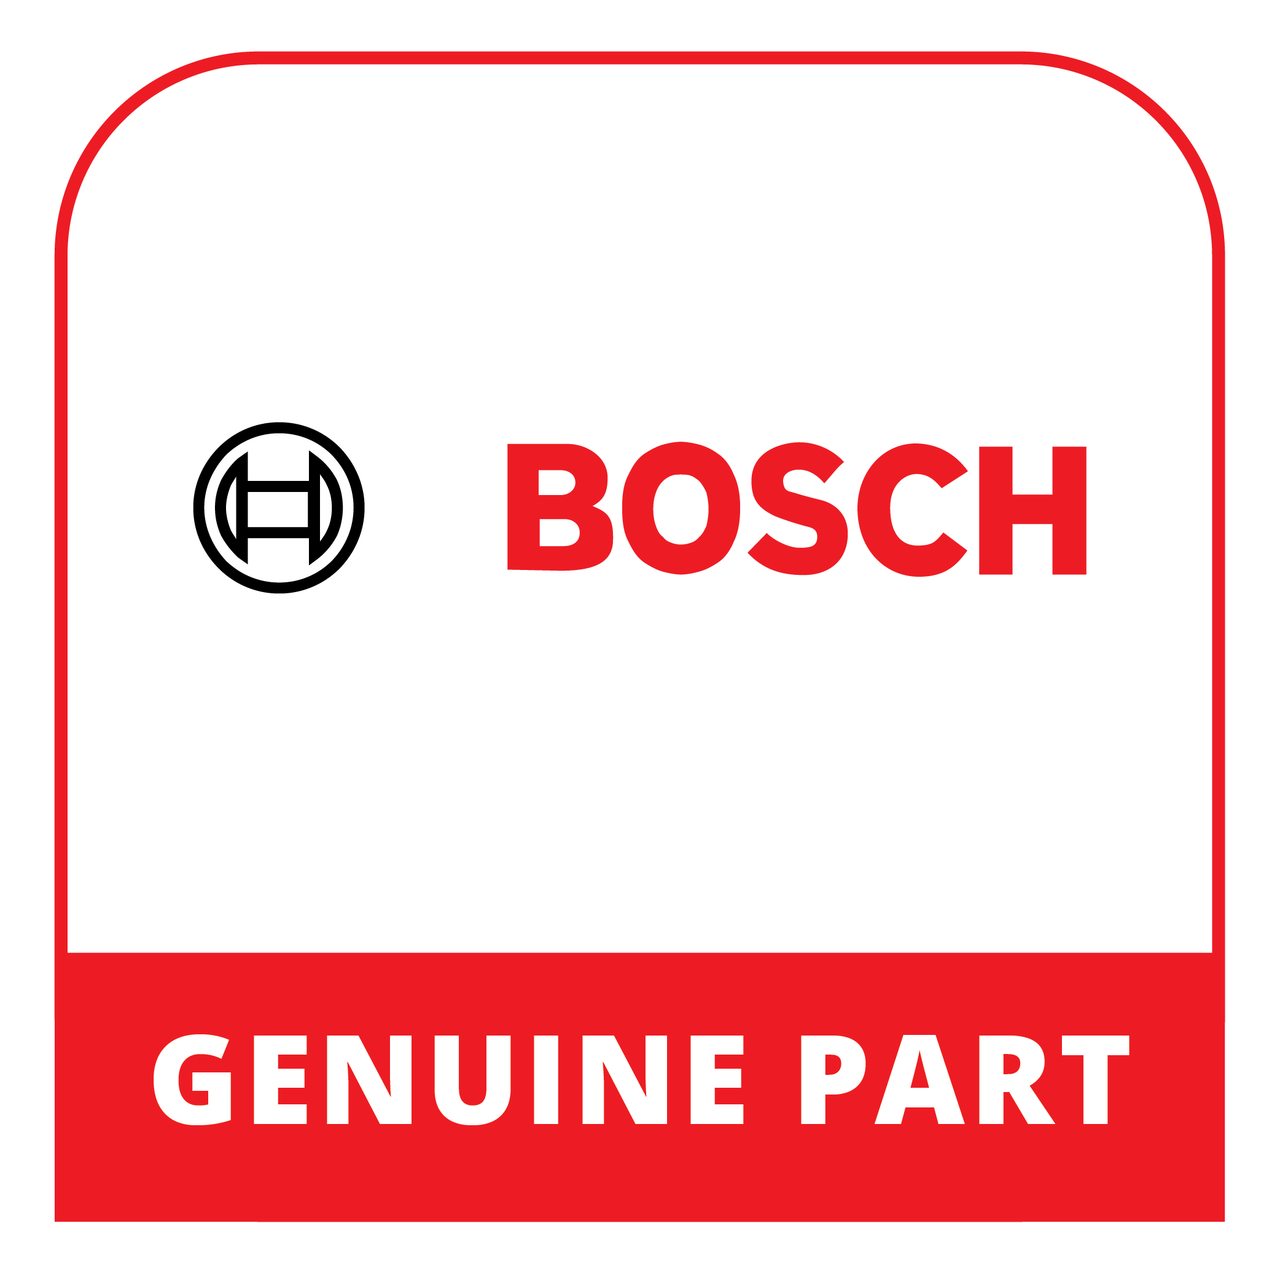 Bosch (Thermador) 12034870 - Control Module Not Programmed - Genuine Bosch (Thermador) Part